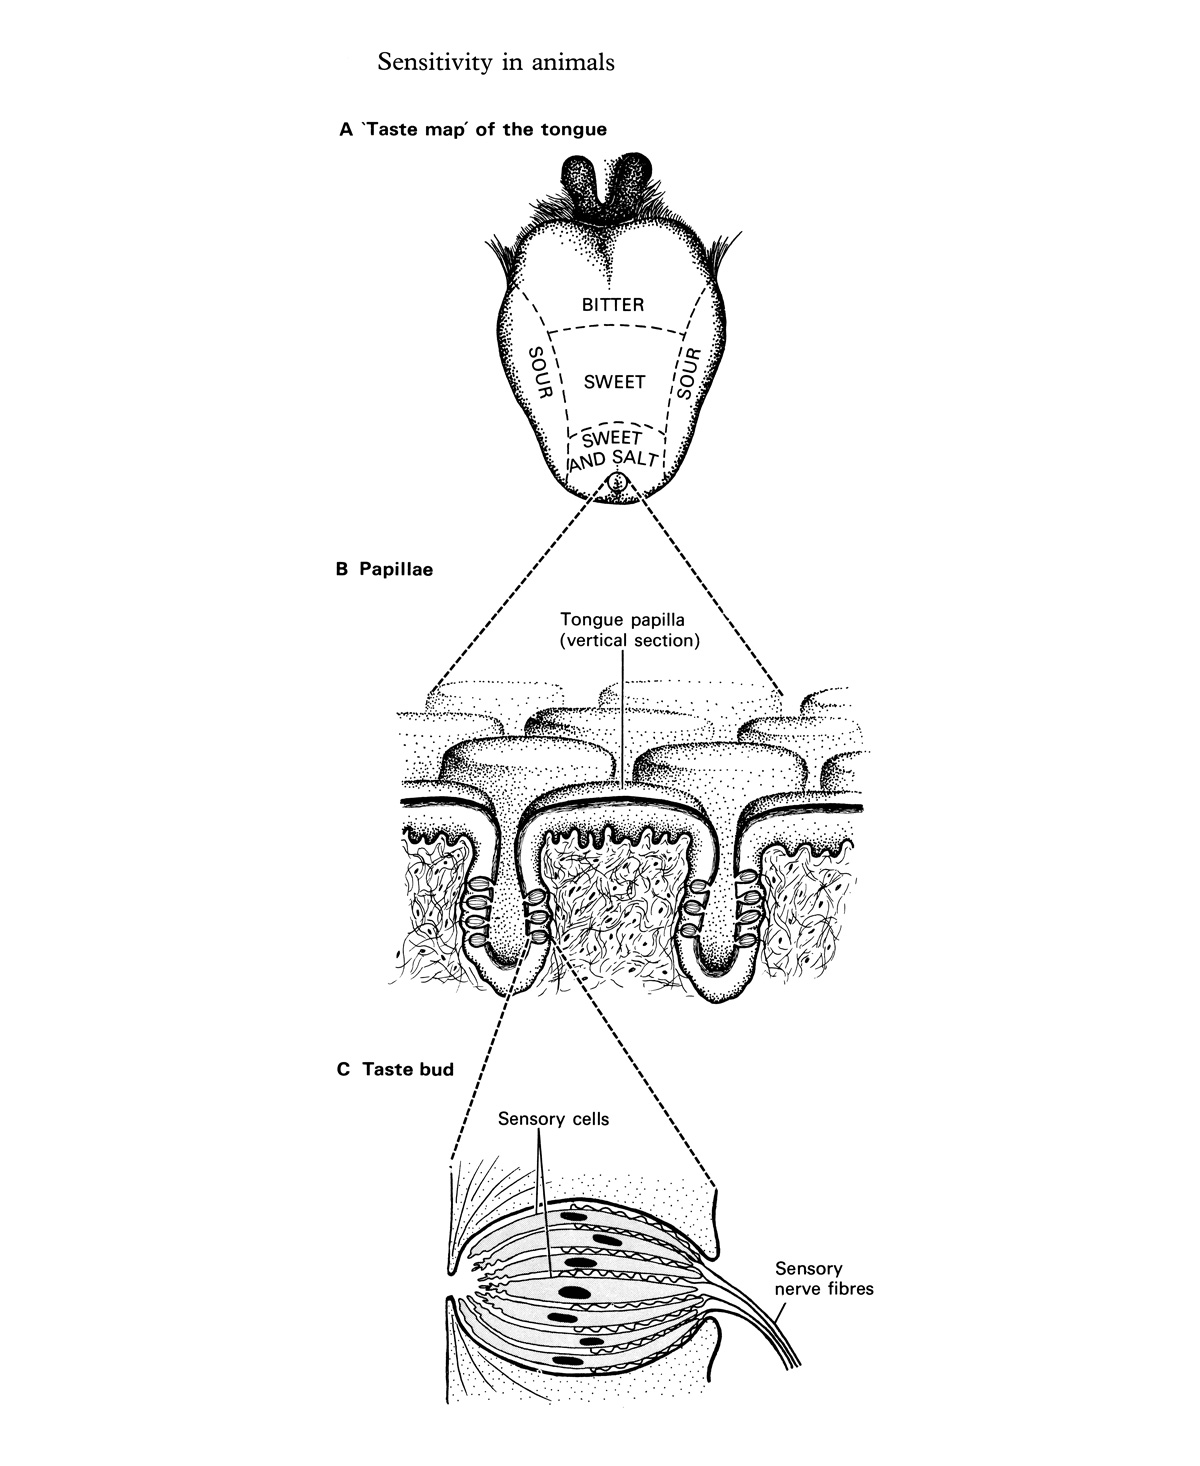 An illustration depicting the taste map of a human tongue, a cross-section of the tongue’s papillae. and a detail of a taste bud.